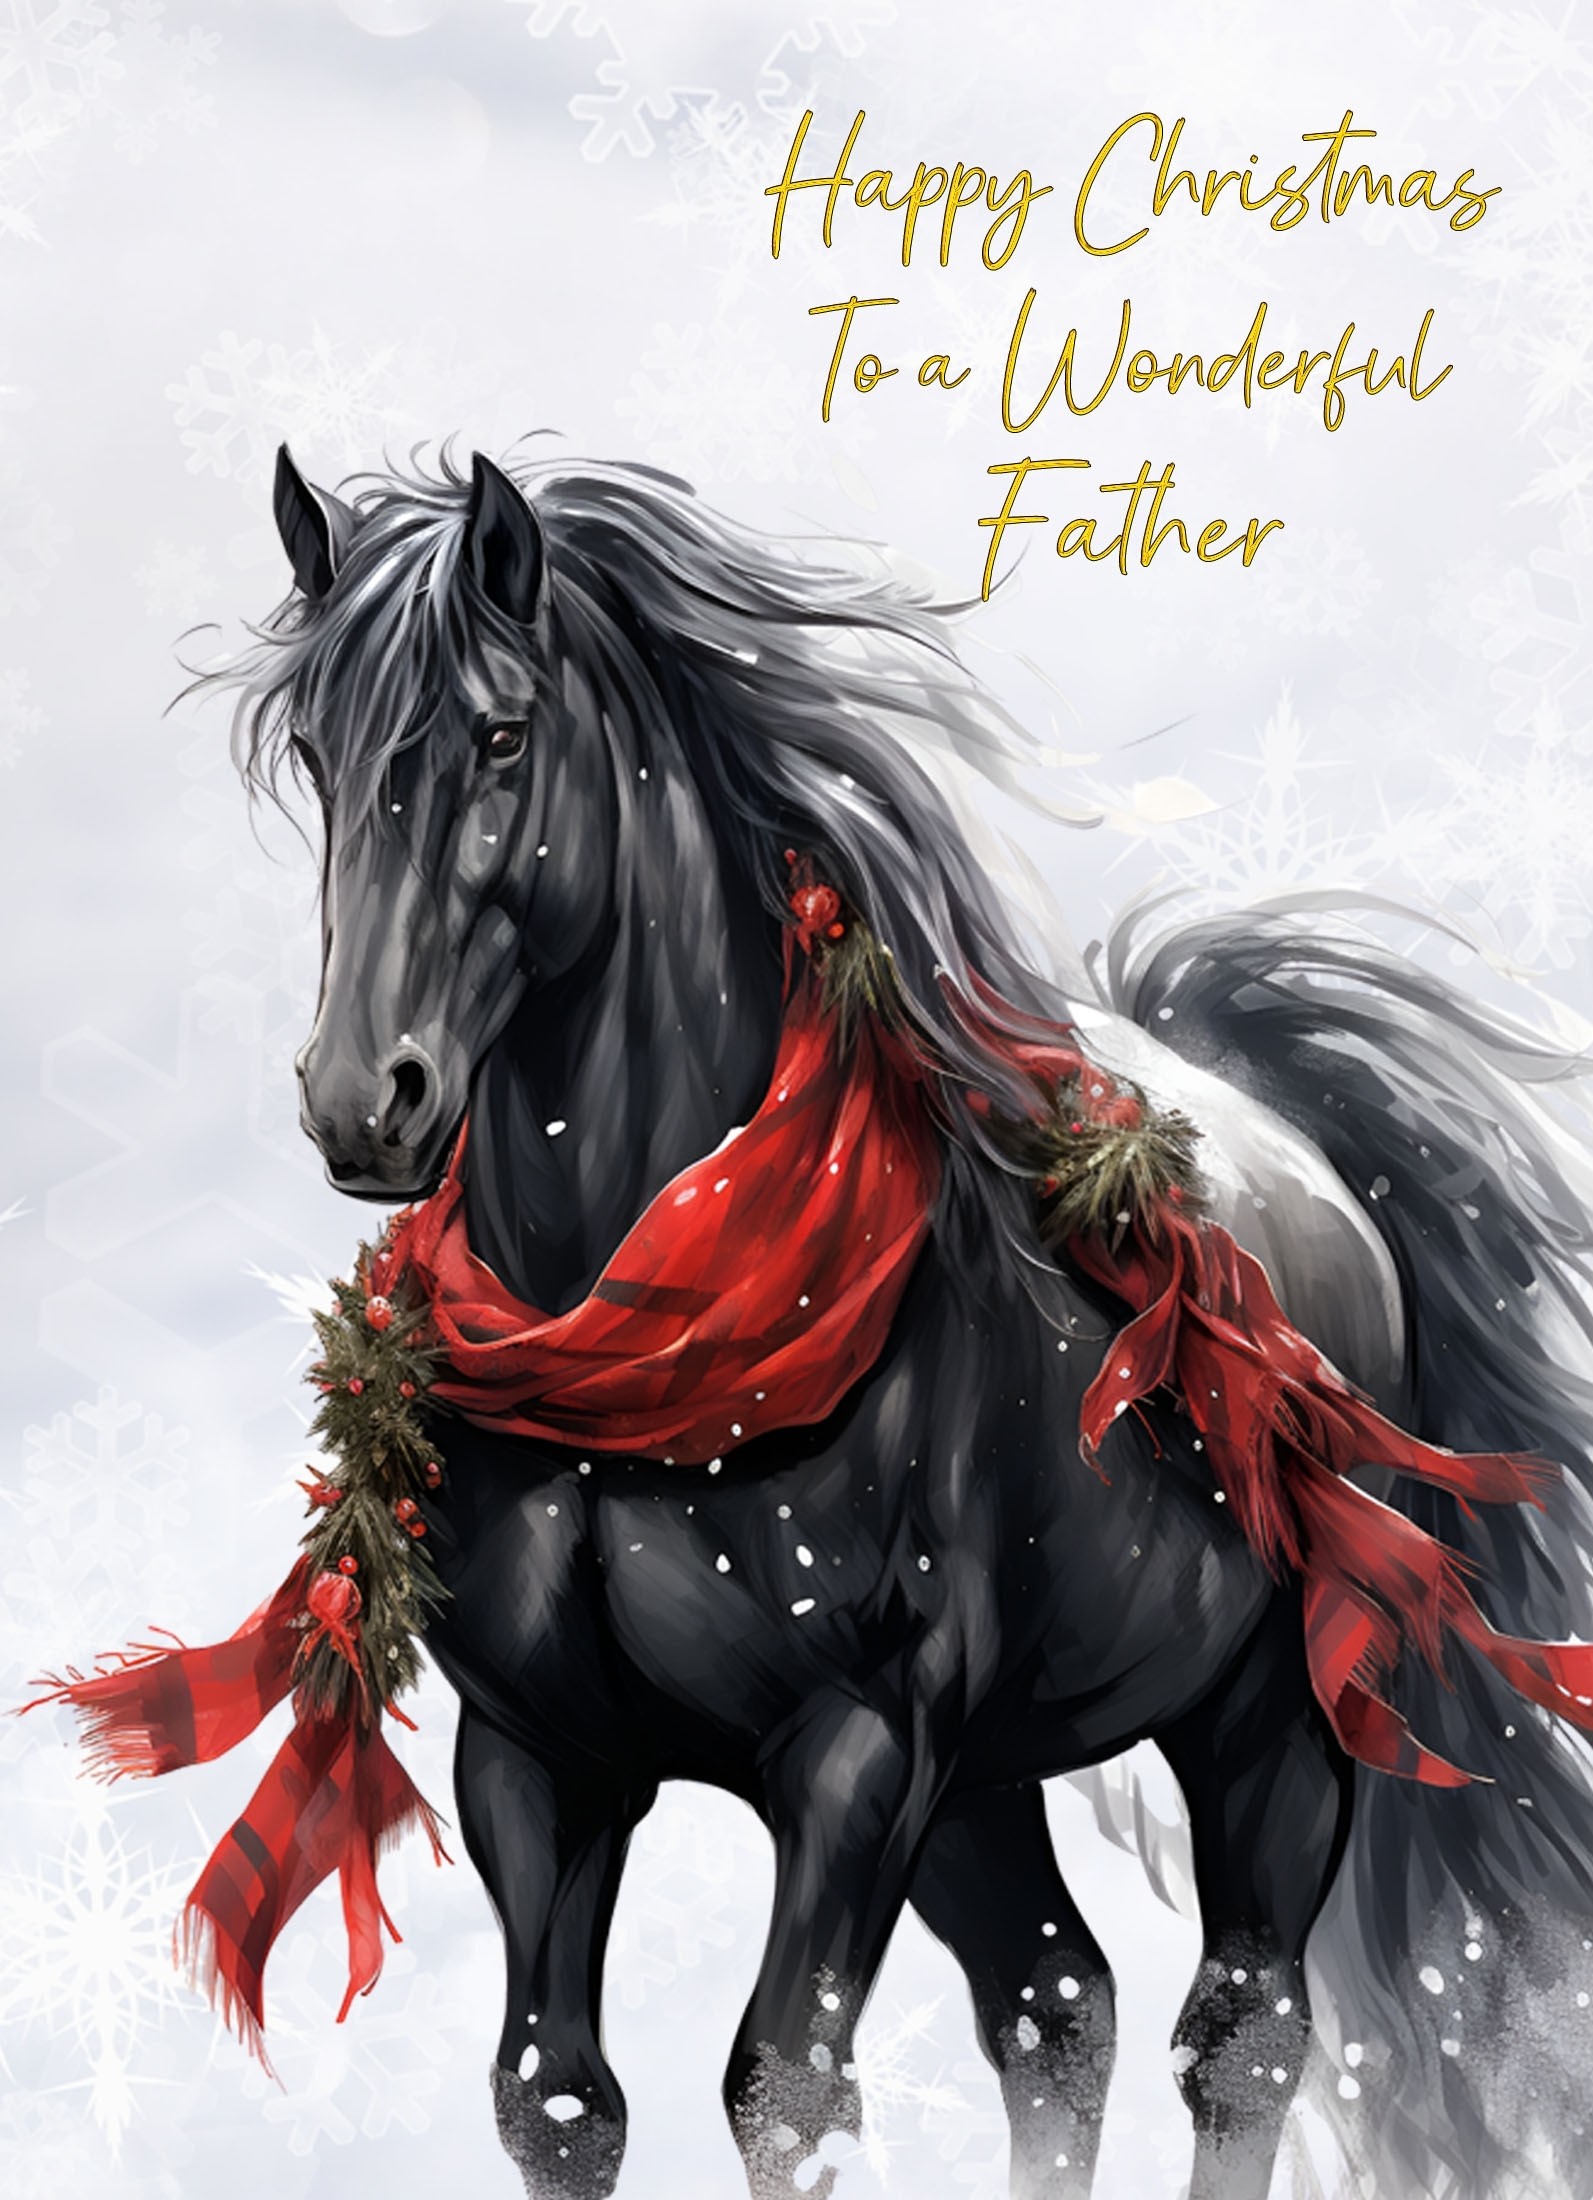 Christmas Card For Father (Horse Art Black)